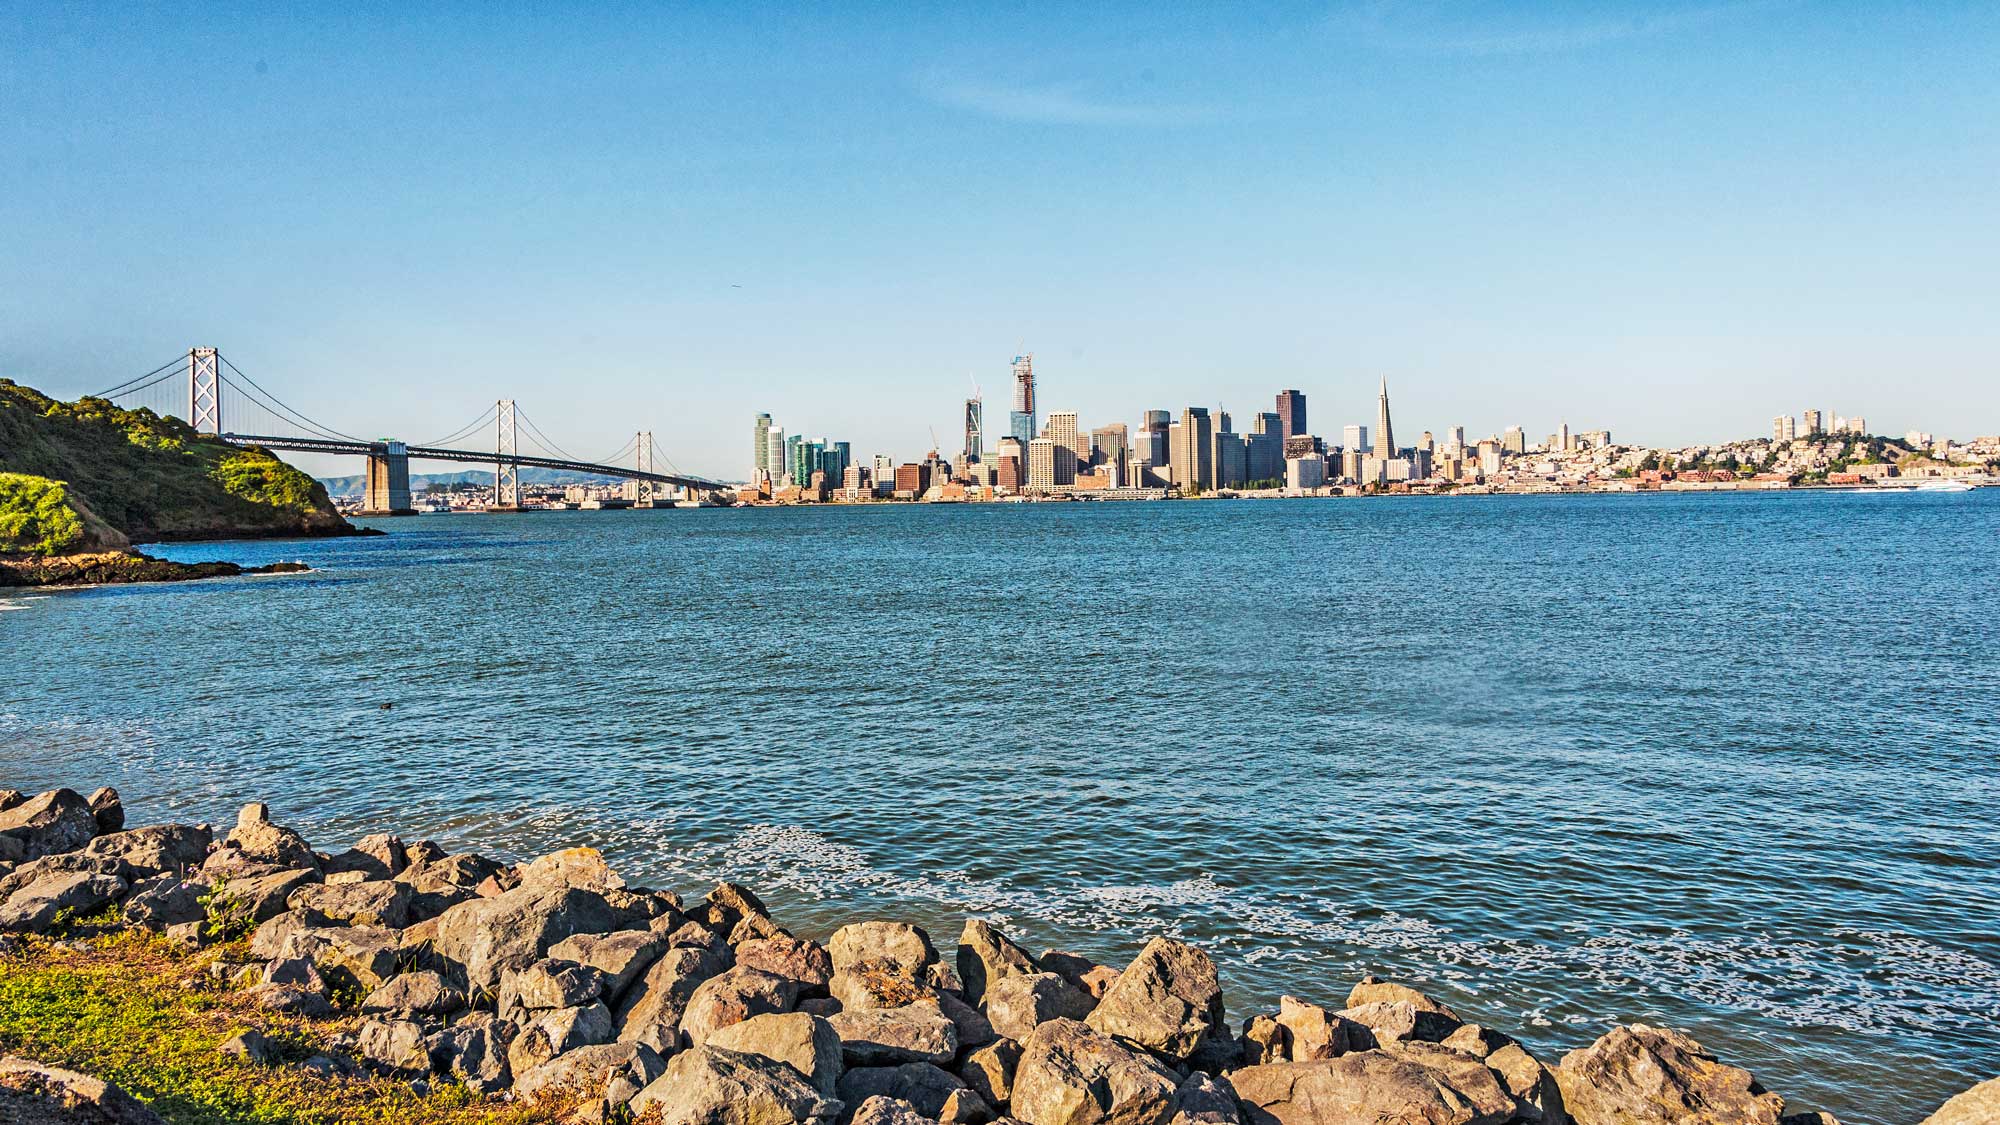 Harris to Provide Special District Finance Services for Improvements to Treasure Island/Yerba Buena Island